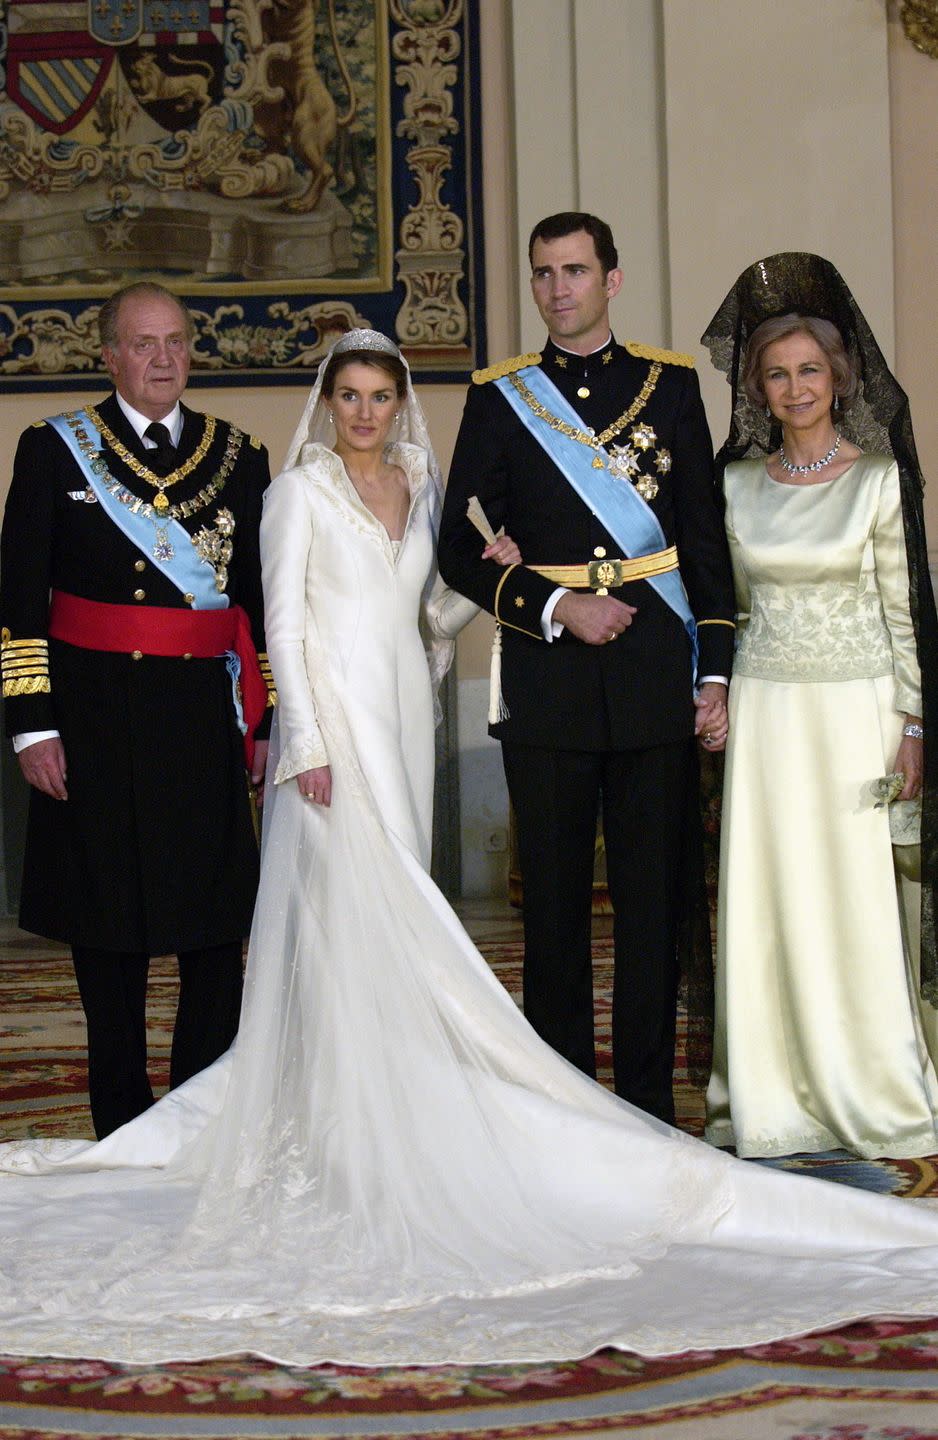 <p><strong>When: </strong>May 22, 2004 </p><p><strong>Where: </strong>The Cathedral Santa María la Real de la Almudena in Madrid</p><p><strong>Cost: </strong>£6 million</p><p><strong>Designer: </strong>Royal couturier Manuel Pertegaz</p><p><strong>Most royal detail: </strong>The real gold thread embroidery woven into the silk.</p>